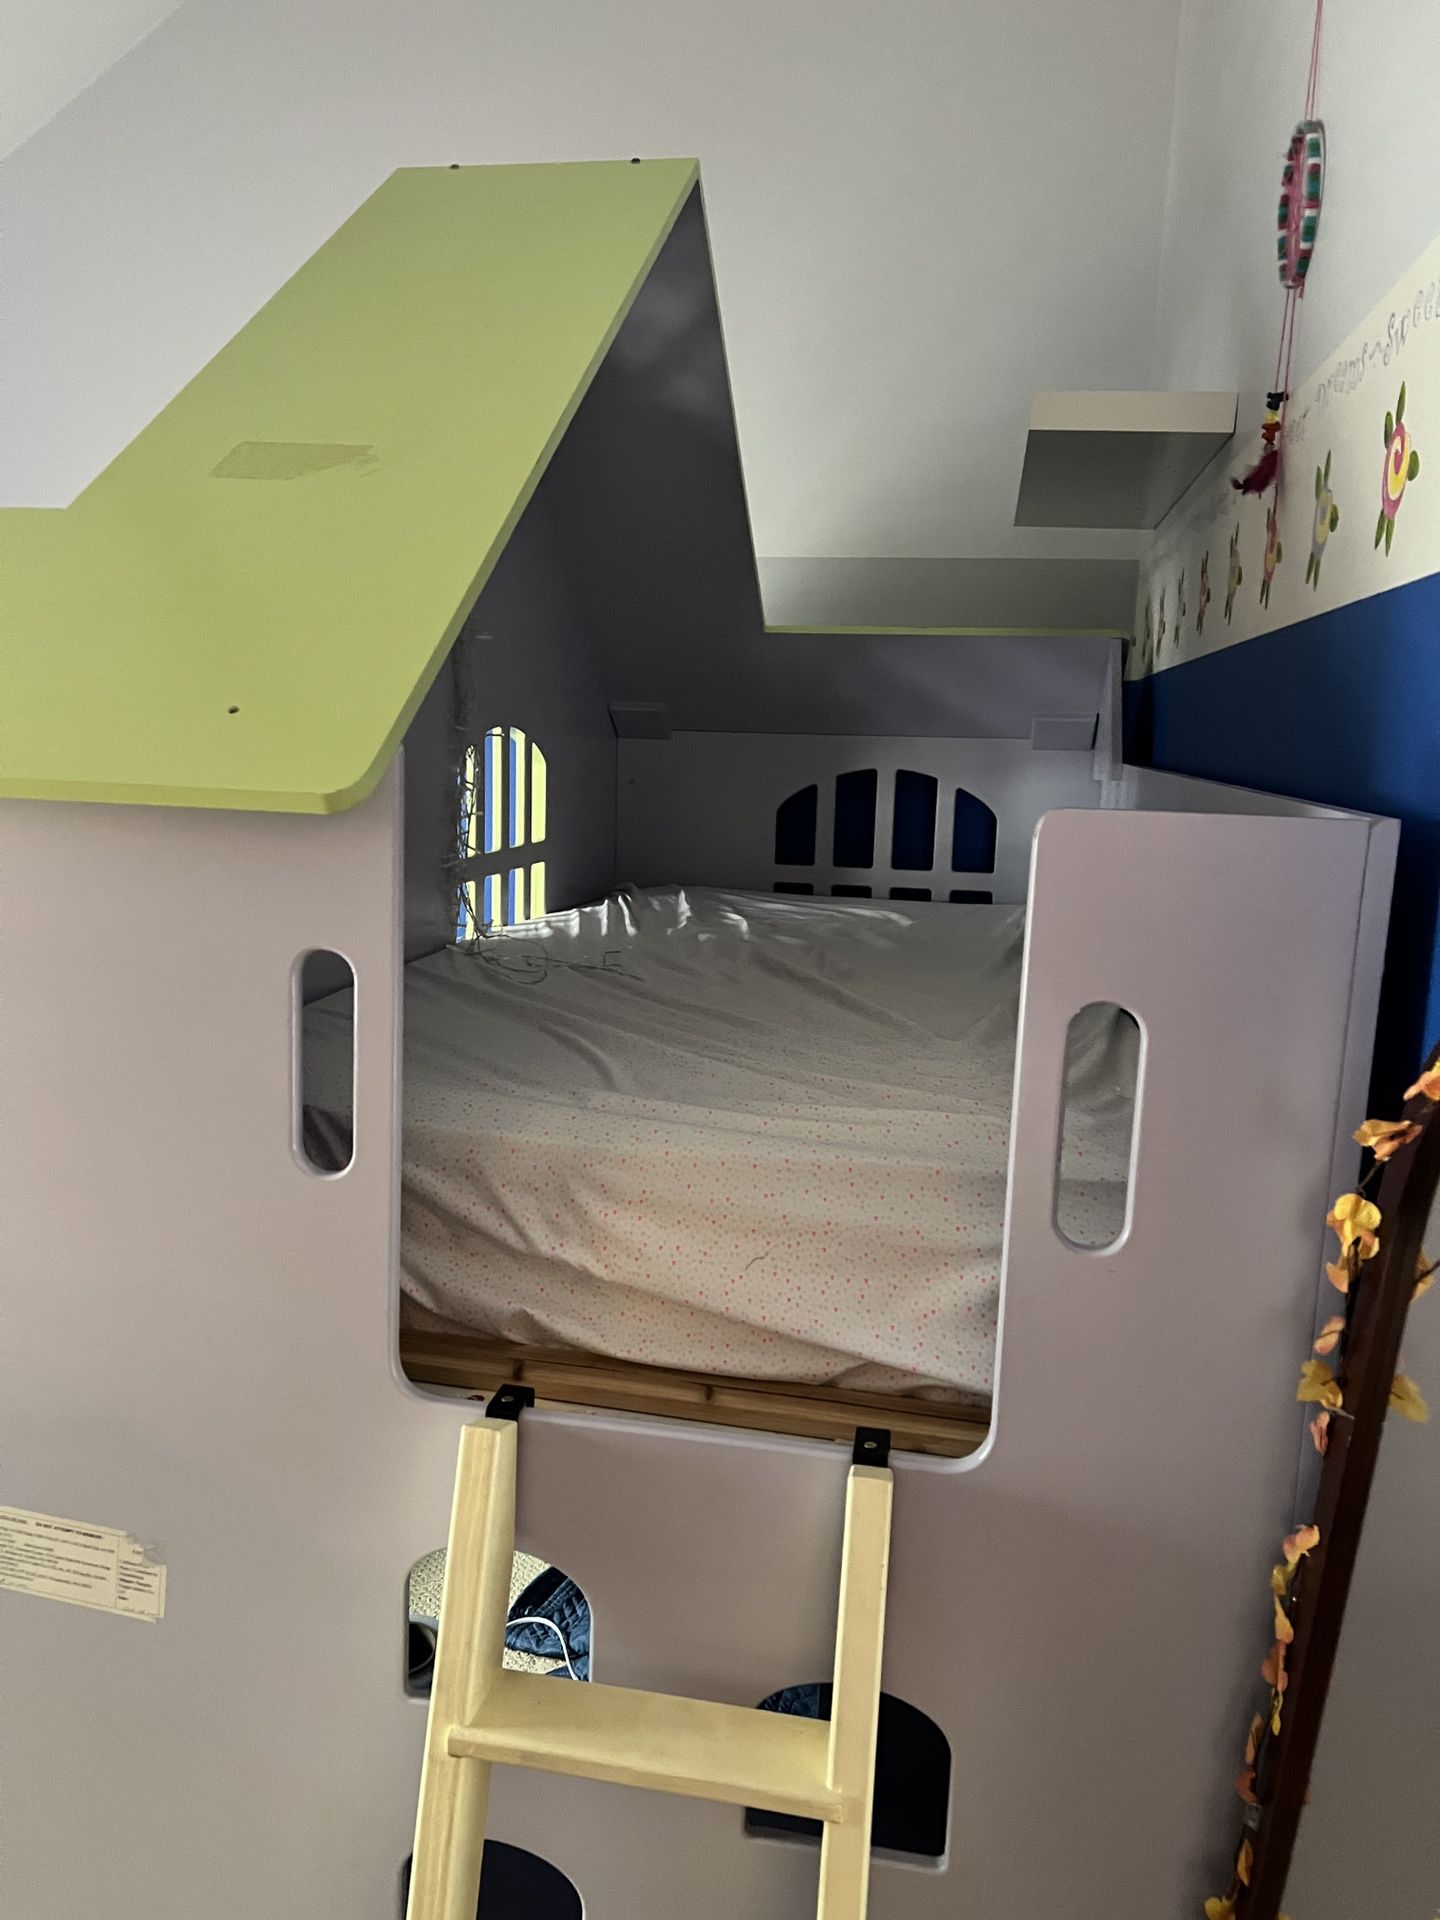 Dollhouse Twin Bed For Sale